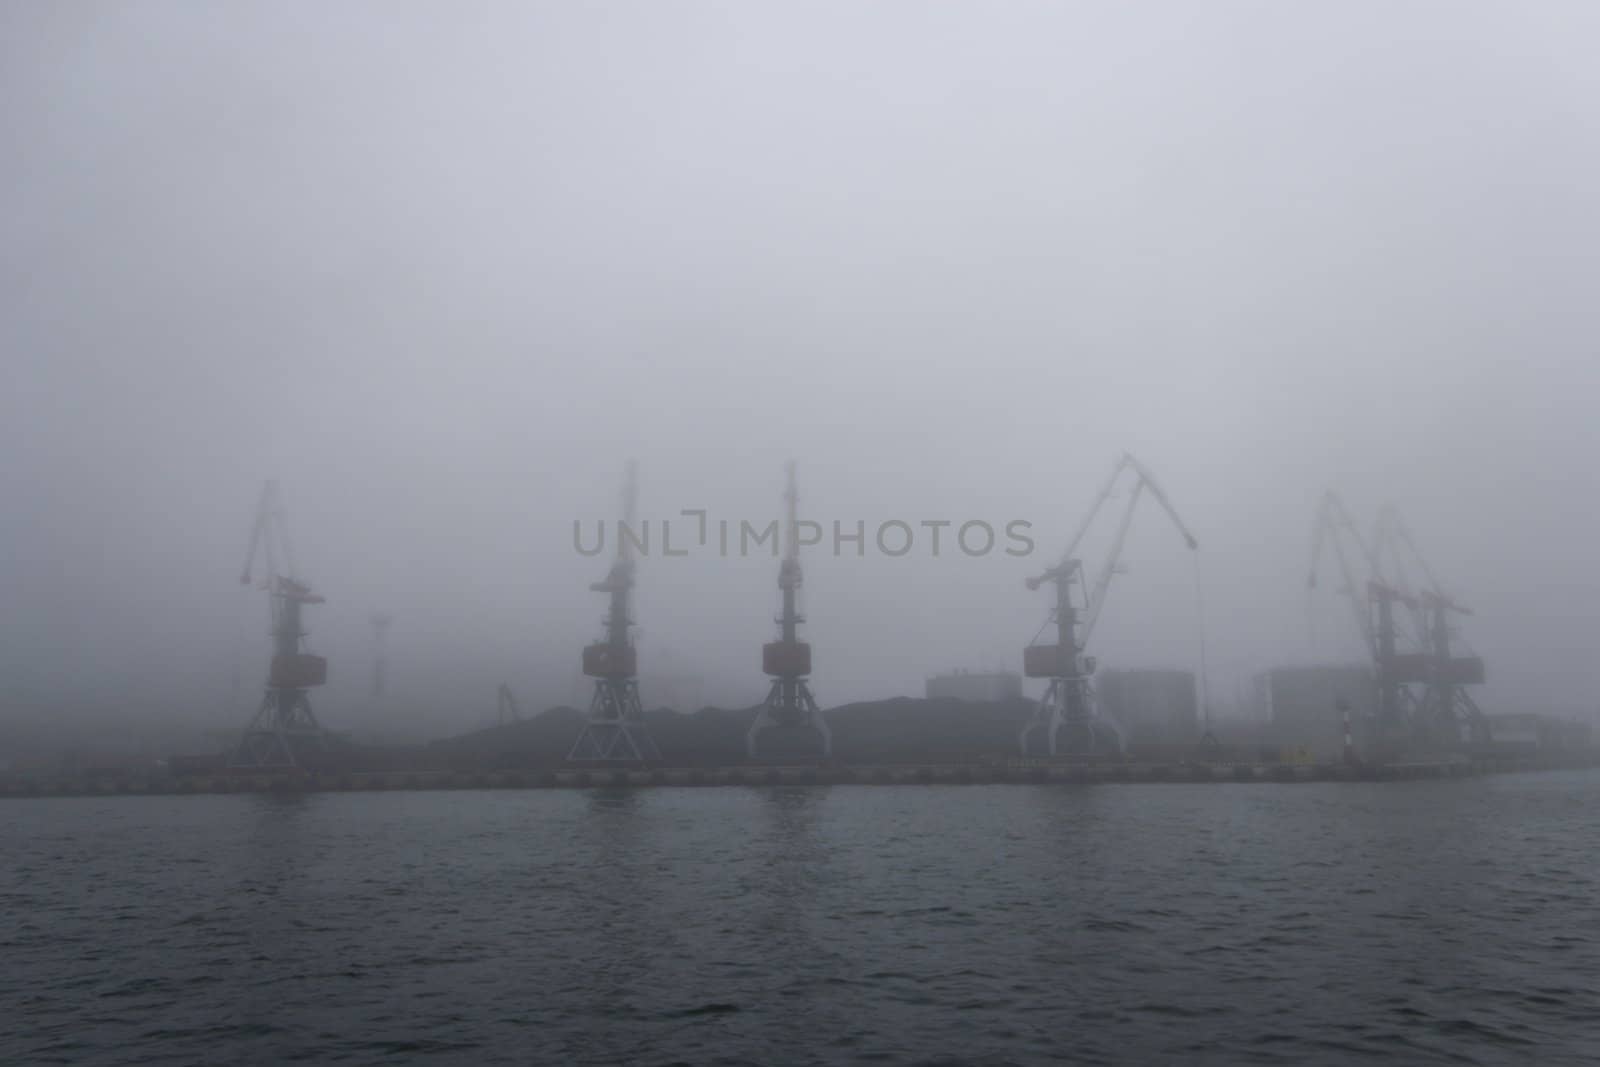 Seaport in a fog early in the morning